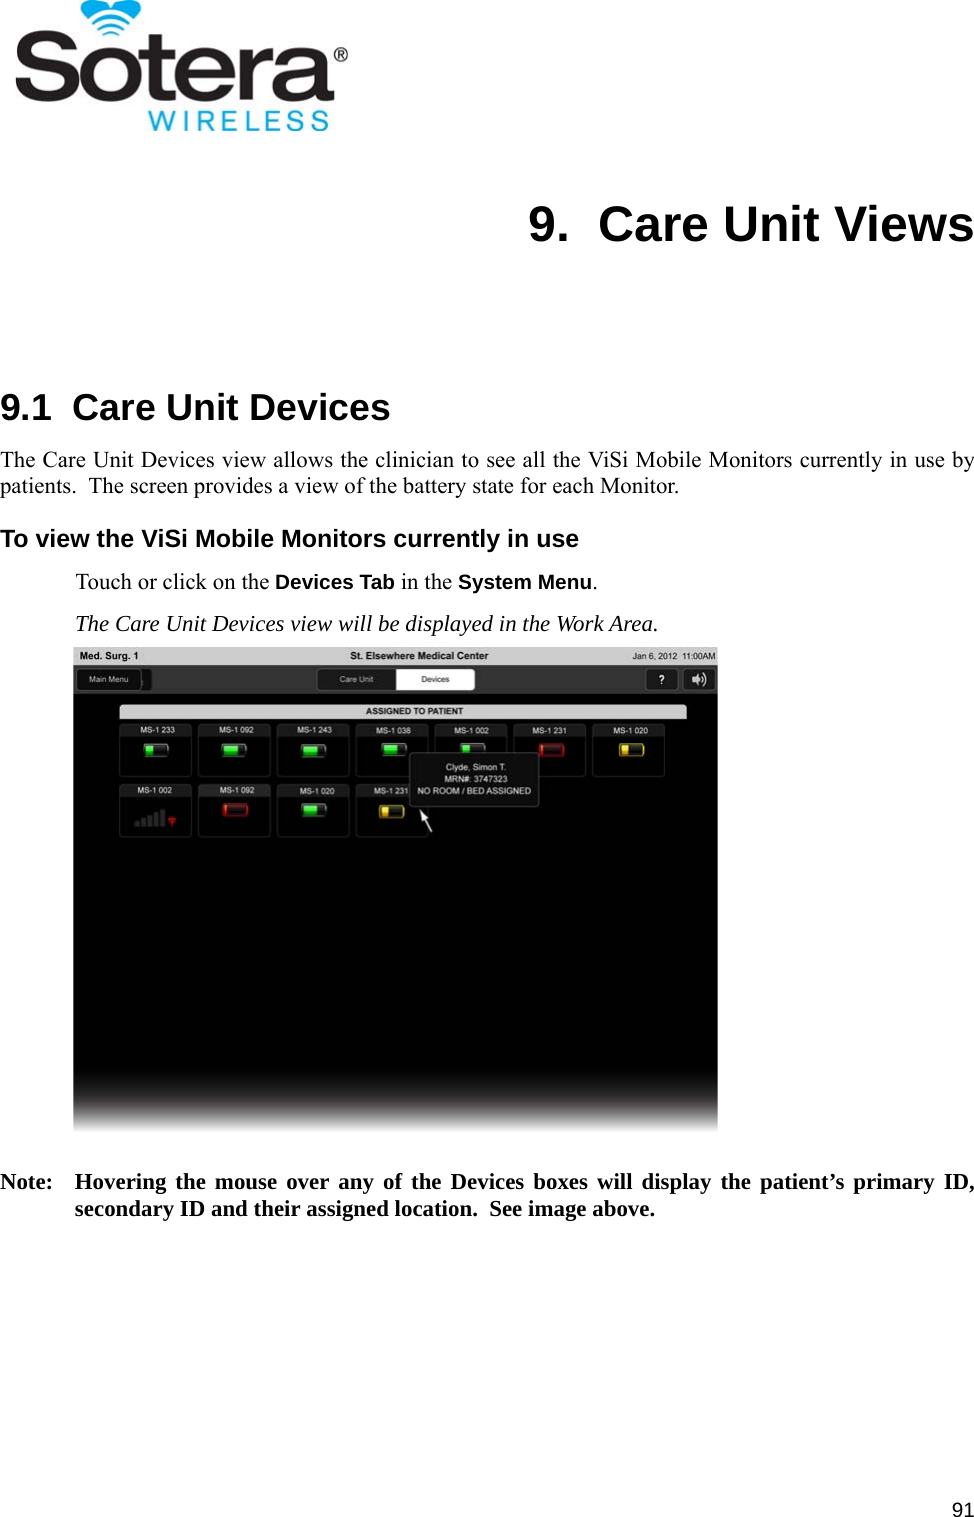 919.  Care Unit Views9.1  Care Unit DevicesThe Care Unit Devices view allows the clinician to see all the ViSi Mobile Monitors currently in use bypatients.  The screen provides a view of the battery state for each Monitor.To view the ViSi Mobile Monitors currently in useTouch or click on the Devices Tab in the System Menu.The Care Unit Devices view will be displayed in the Work Area.Note: Hovering the mouse over any of the Devices boxes will display the patient’s primary ID,secondary ID and their assigned location.  See image above.